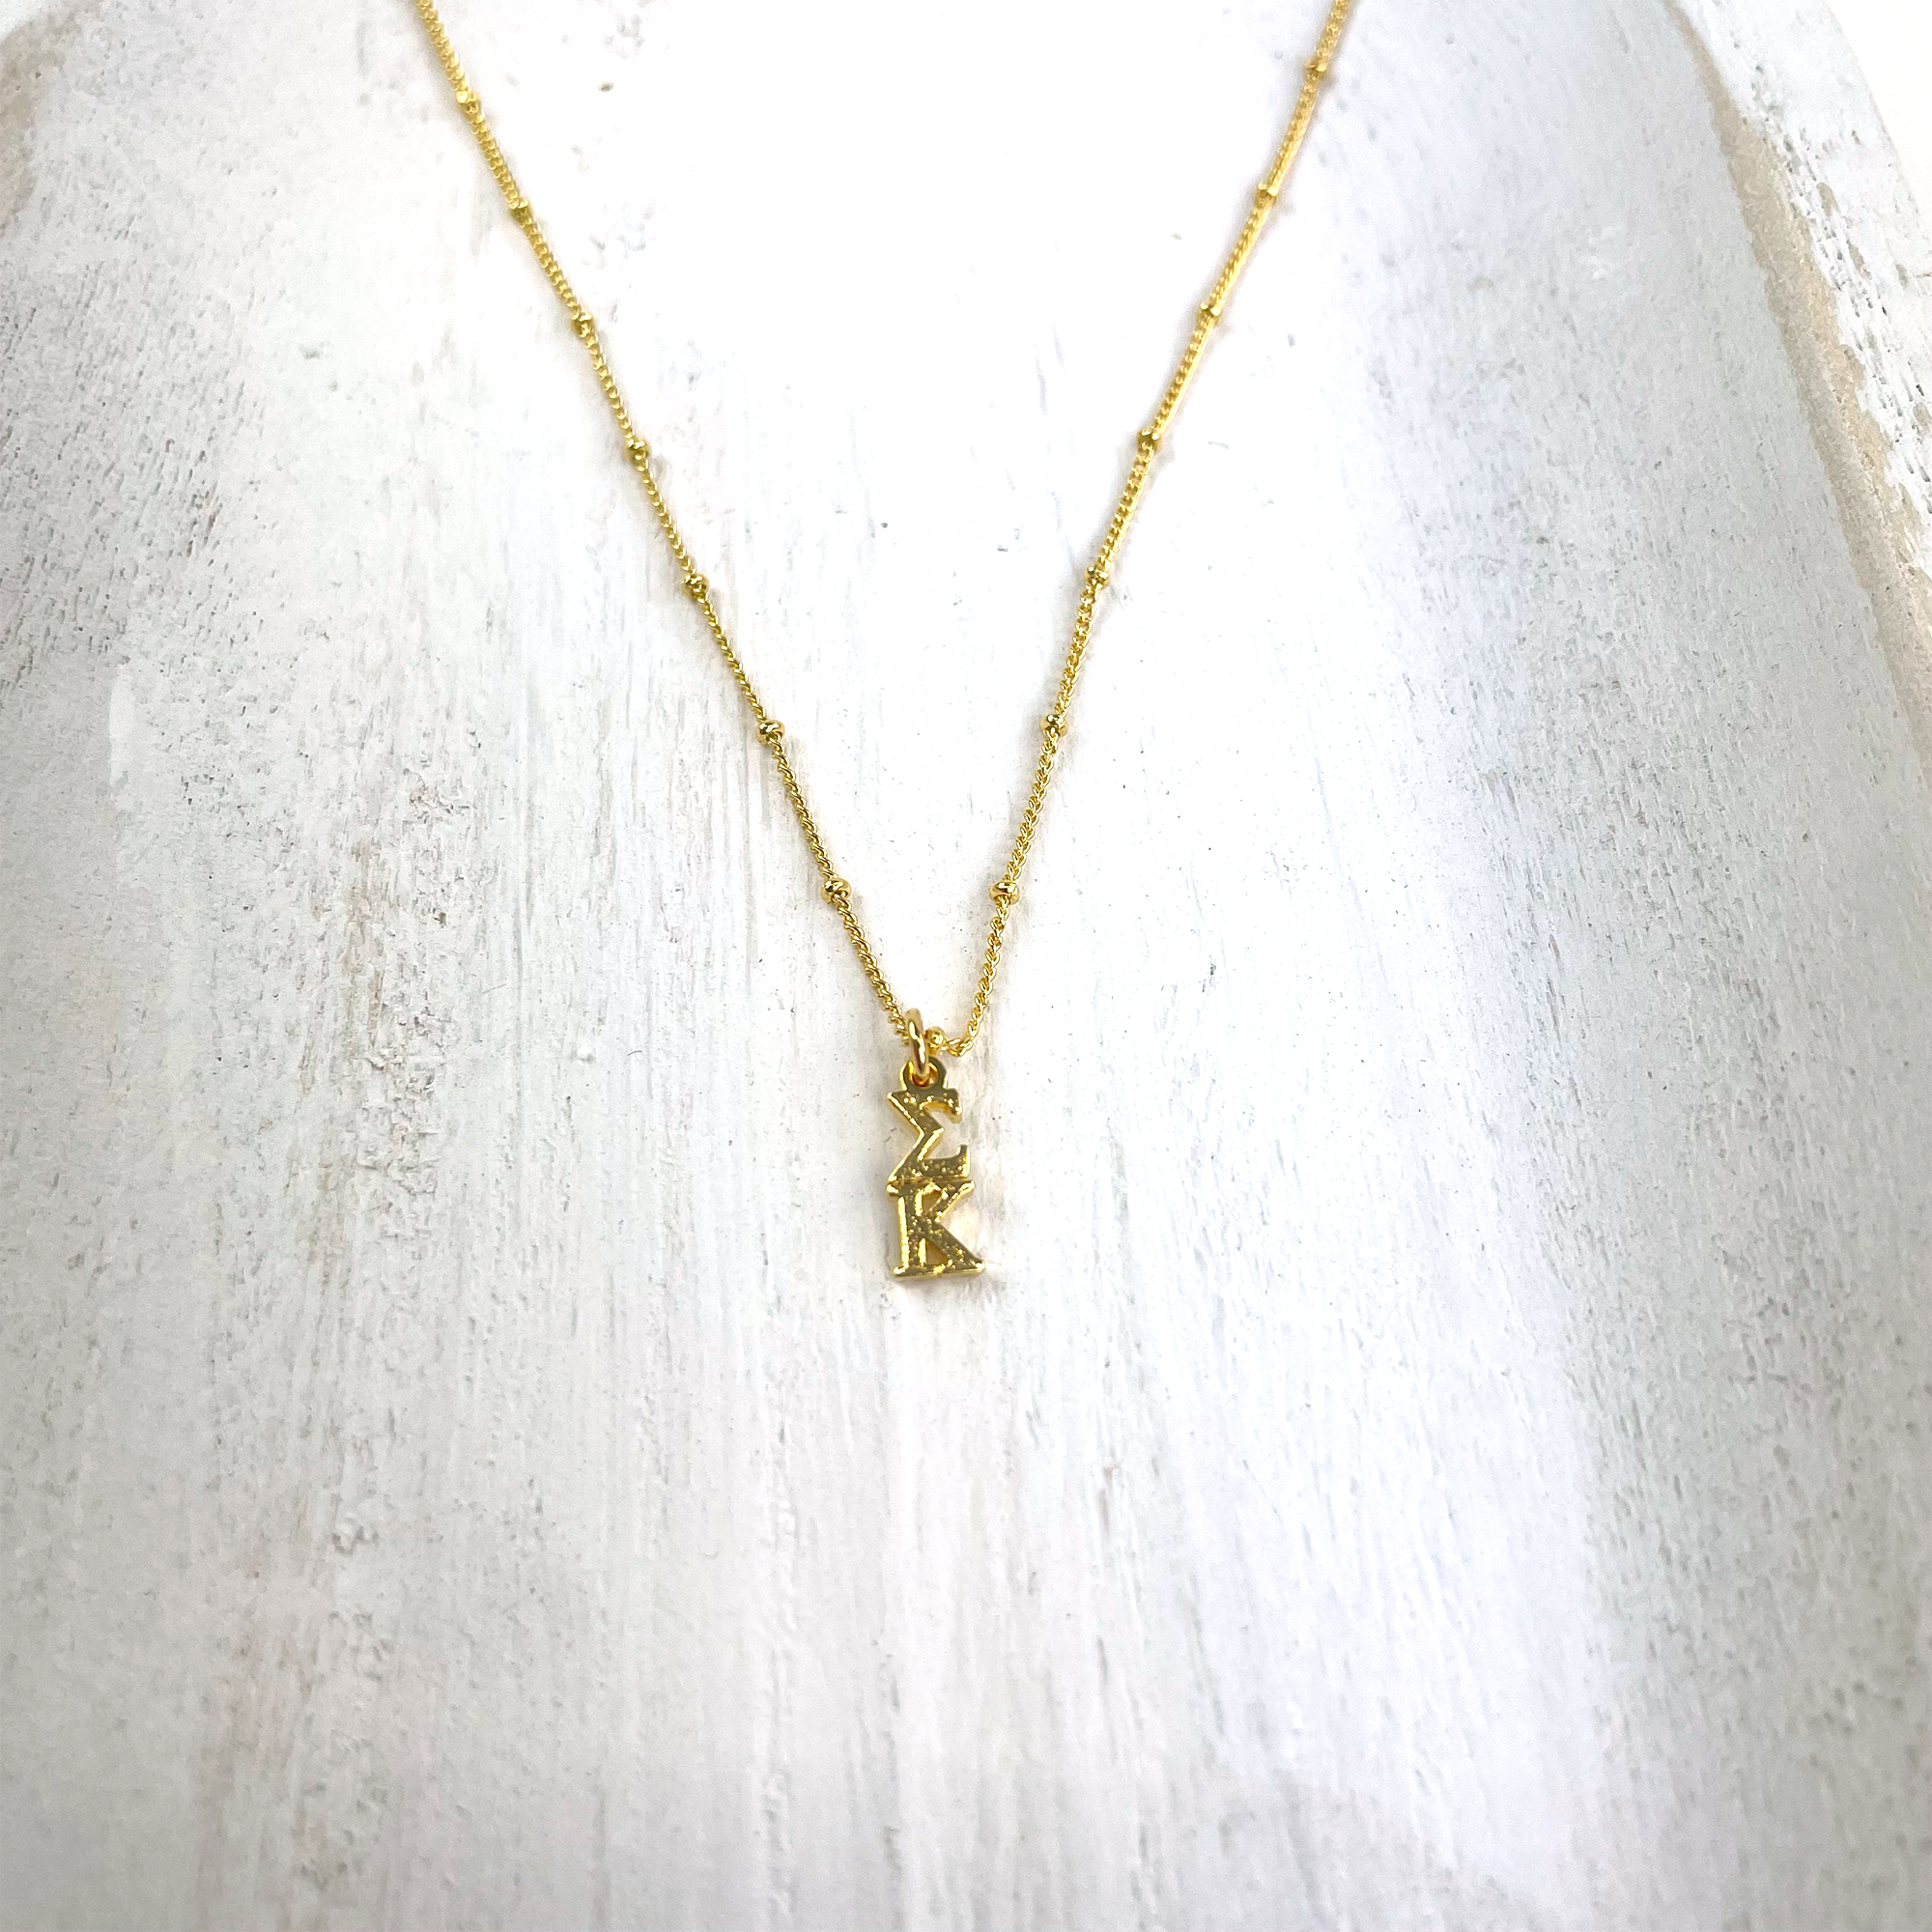 Sigma Kappa Lavaliere Gold Necklace - Go Greek Chic